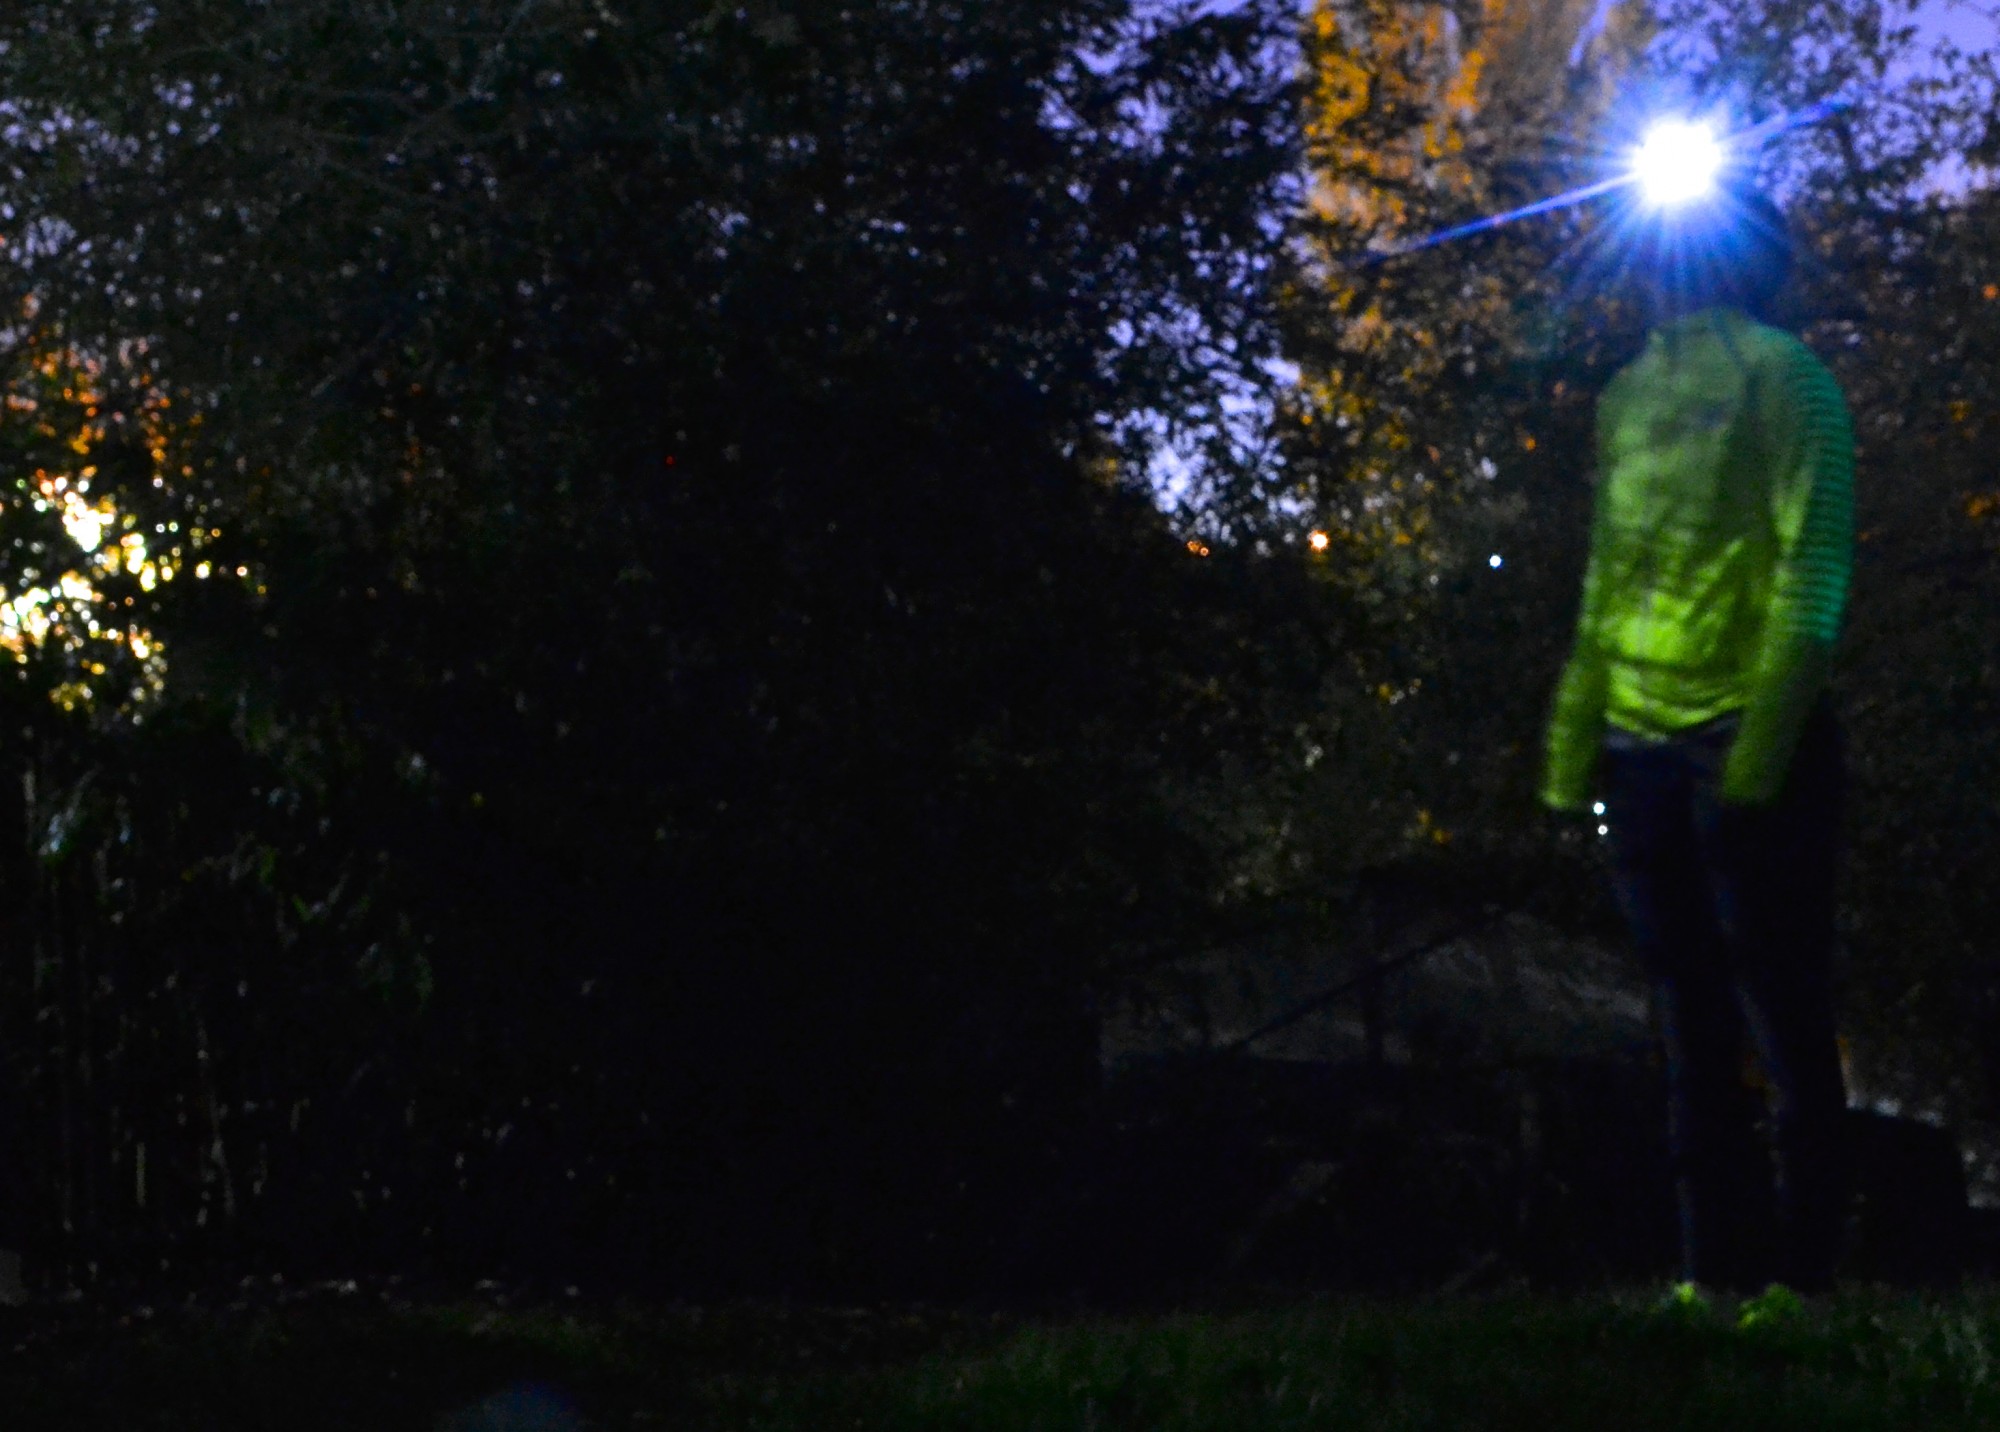 runner wearing bright clothes and headlamp at night